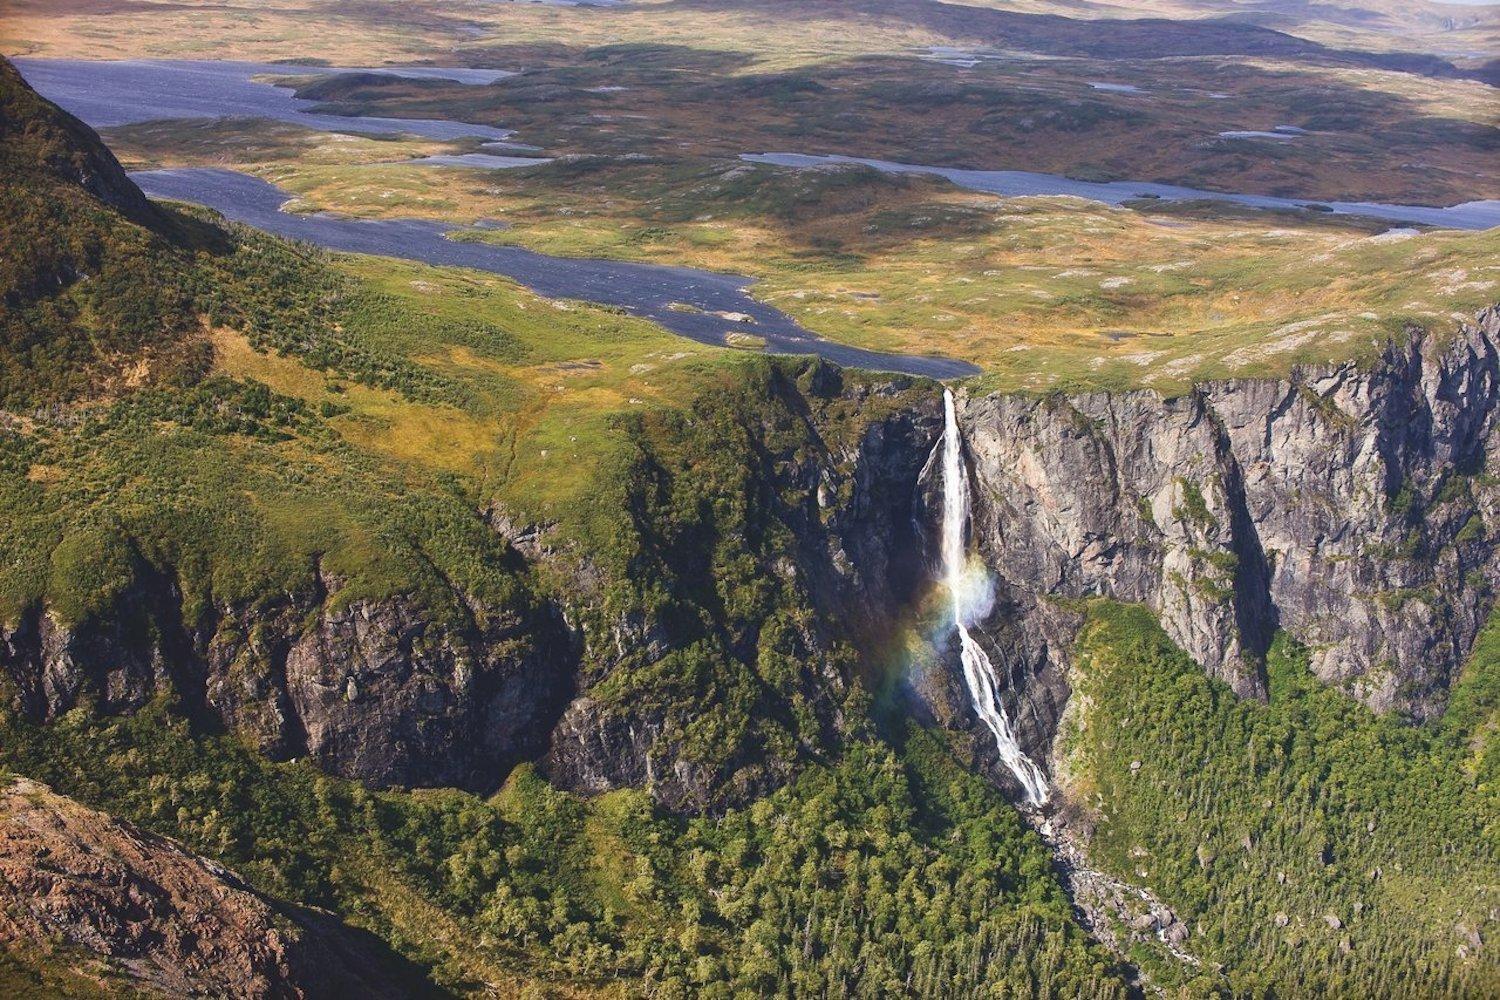 An aerial view of the Tablelands waterfall in Gros Morne National Park.